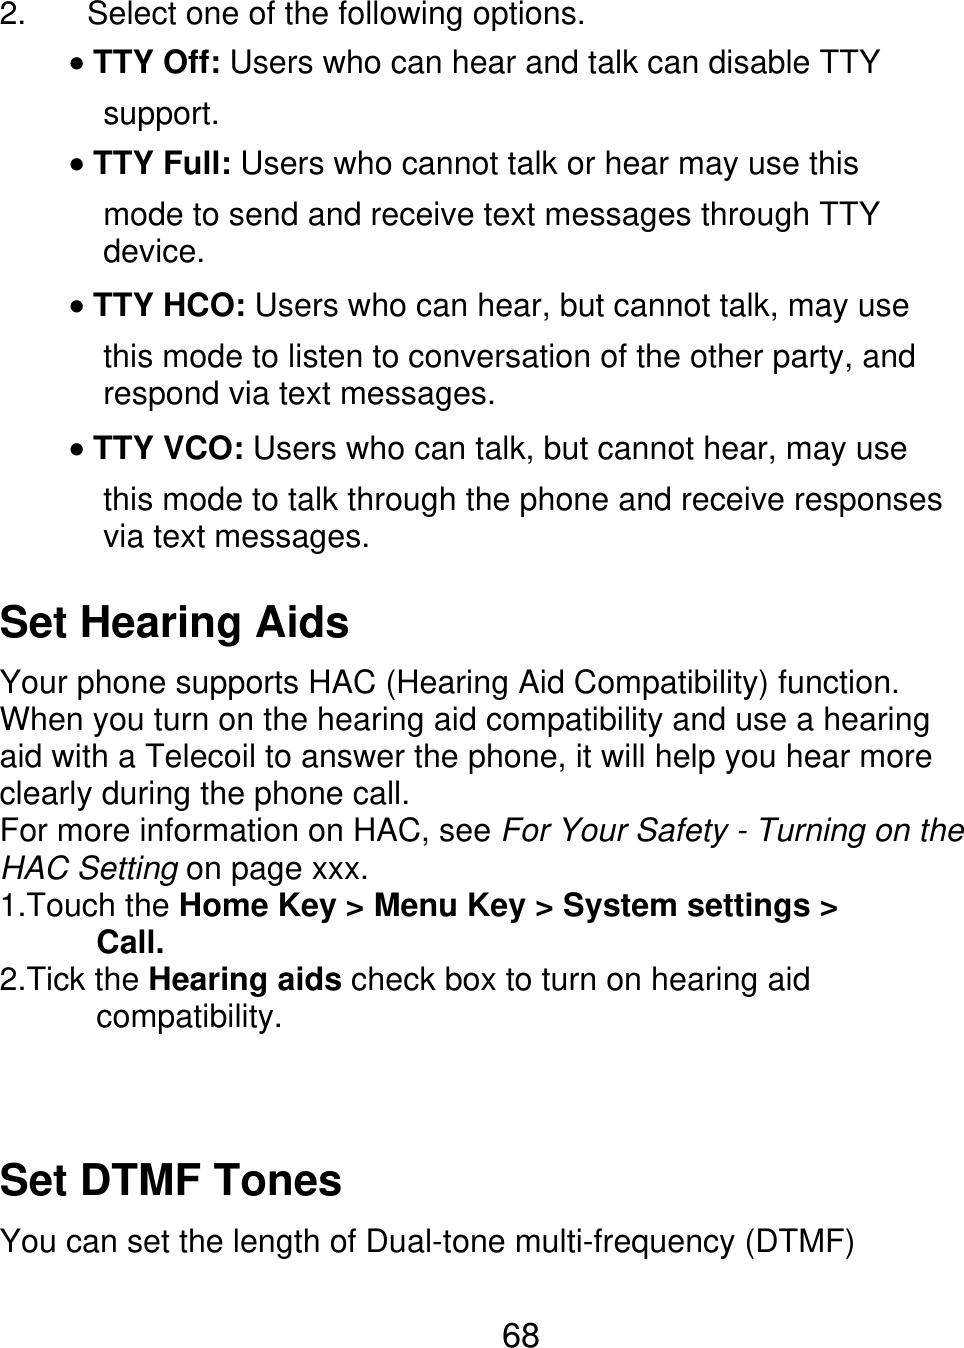 2. Select one of the following options. TTY Off: Users who can hear and talk can disable TTY support. TTY Full: Users who cannot talk or hear may use this mode to send and receive text messages through TTY device. TTY HCO: Users who can hear, but cannot talk, may use this mode to listen to conversation of the other party, and respond via text messages. TTY VCO: Users who can talk, but cannot hear, may use this mode to talk through the phone and receive responses via text messages. Set Hearing Aids Your phone supports HAC (Hearing Aid Compatibility) function. When you turn on the hearing aid compatibility and use a hearing aid with a Telecoil to answer the phone, it will help you hear more clearly during the phone call. For more information on HAC, see For Your Safety - Turning on the HAC Setting on page xxx. 1.Touch the Home Key &gt; Menu Key &gt; System settings &gt;       Call. 2.Tick the Hearing aids check box to turn on hearing aid       compatibility. Set DTMF Tones You can set the length of Dual-tone multi-frequency (DTMF) 68 